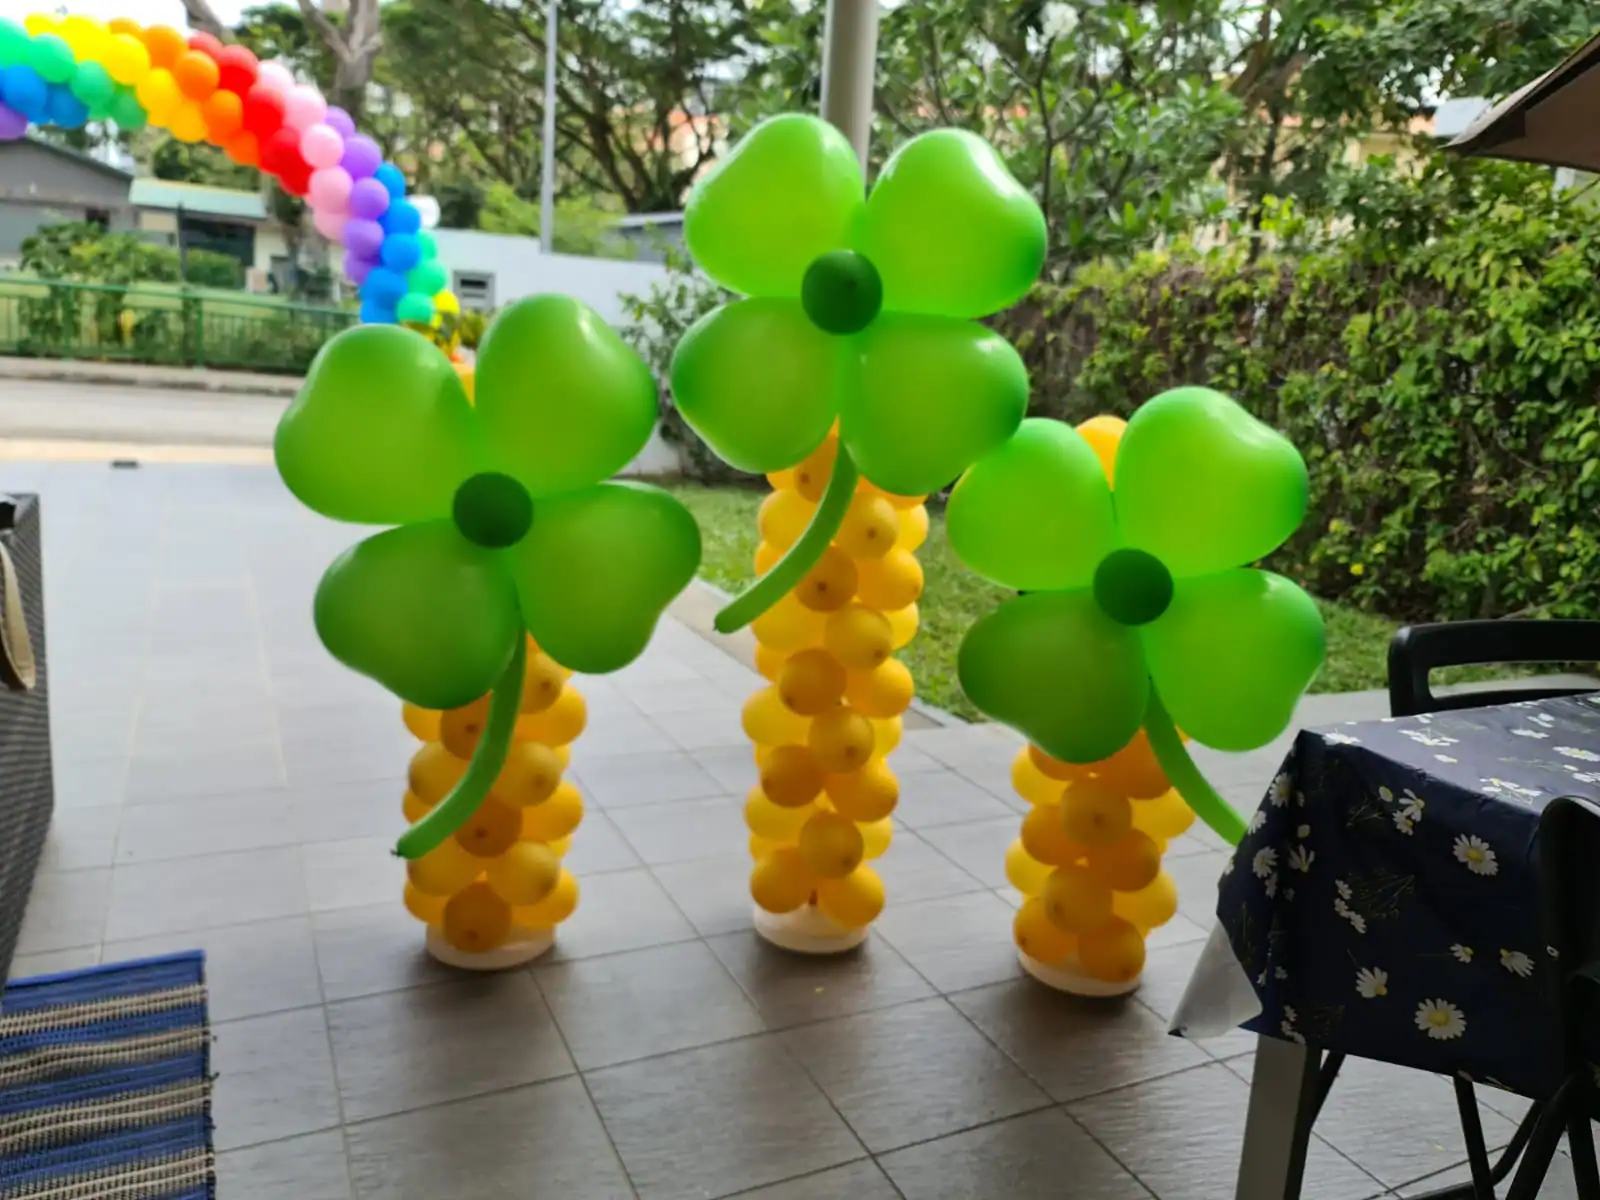 Home Birthday Party With St Patrick’s Day Theme Balloon Decoration